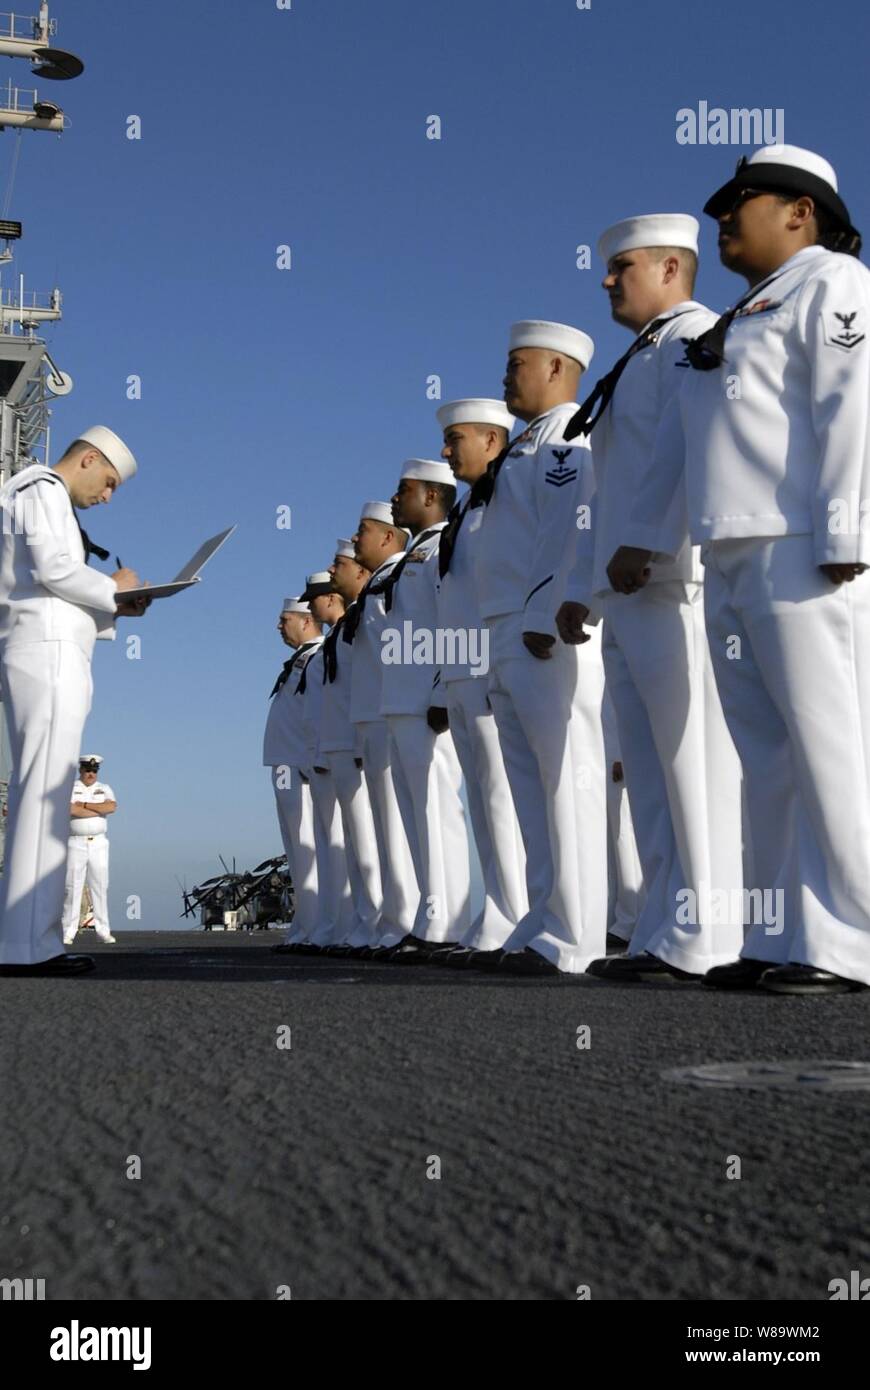 U.S. Navy sailors from the weapons department aboard the USS Boxer (LHD 4) stand in formation during a uniform inspection aboard the ship on May 2, 2008.  The Boxer is deployed in support of Continuing Promise 2008, a two-month humanitarian civic assistance mission to South America. Stock Photo